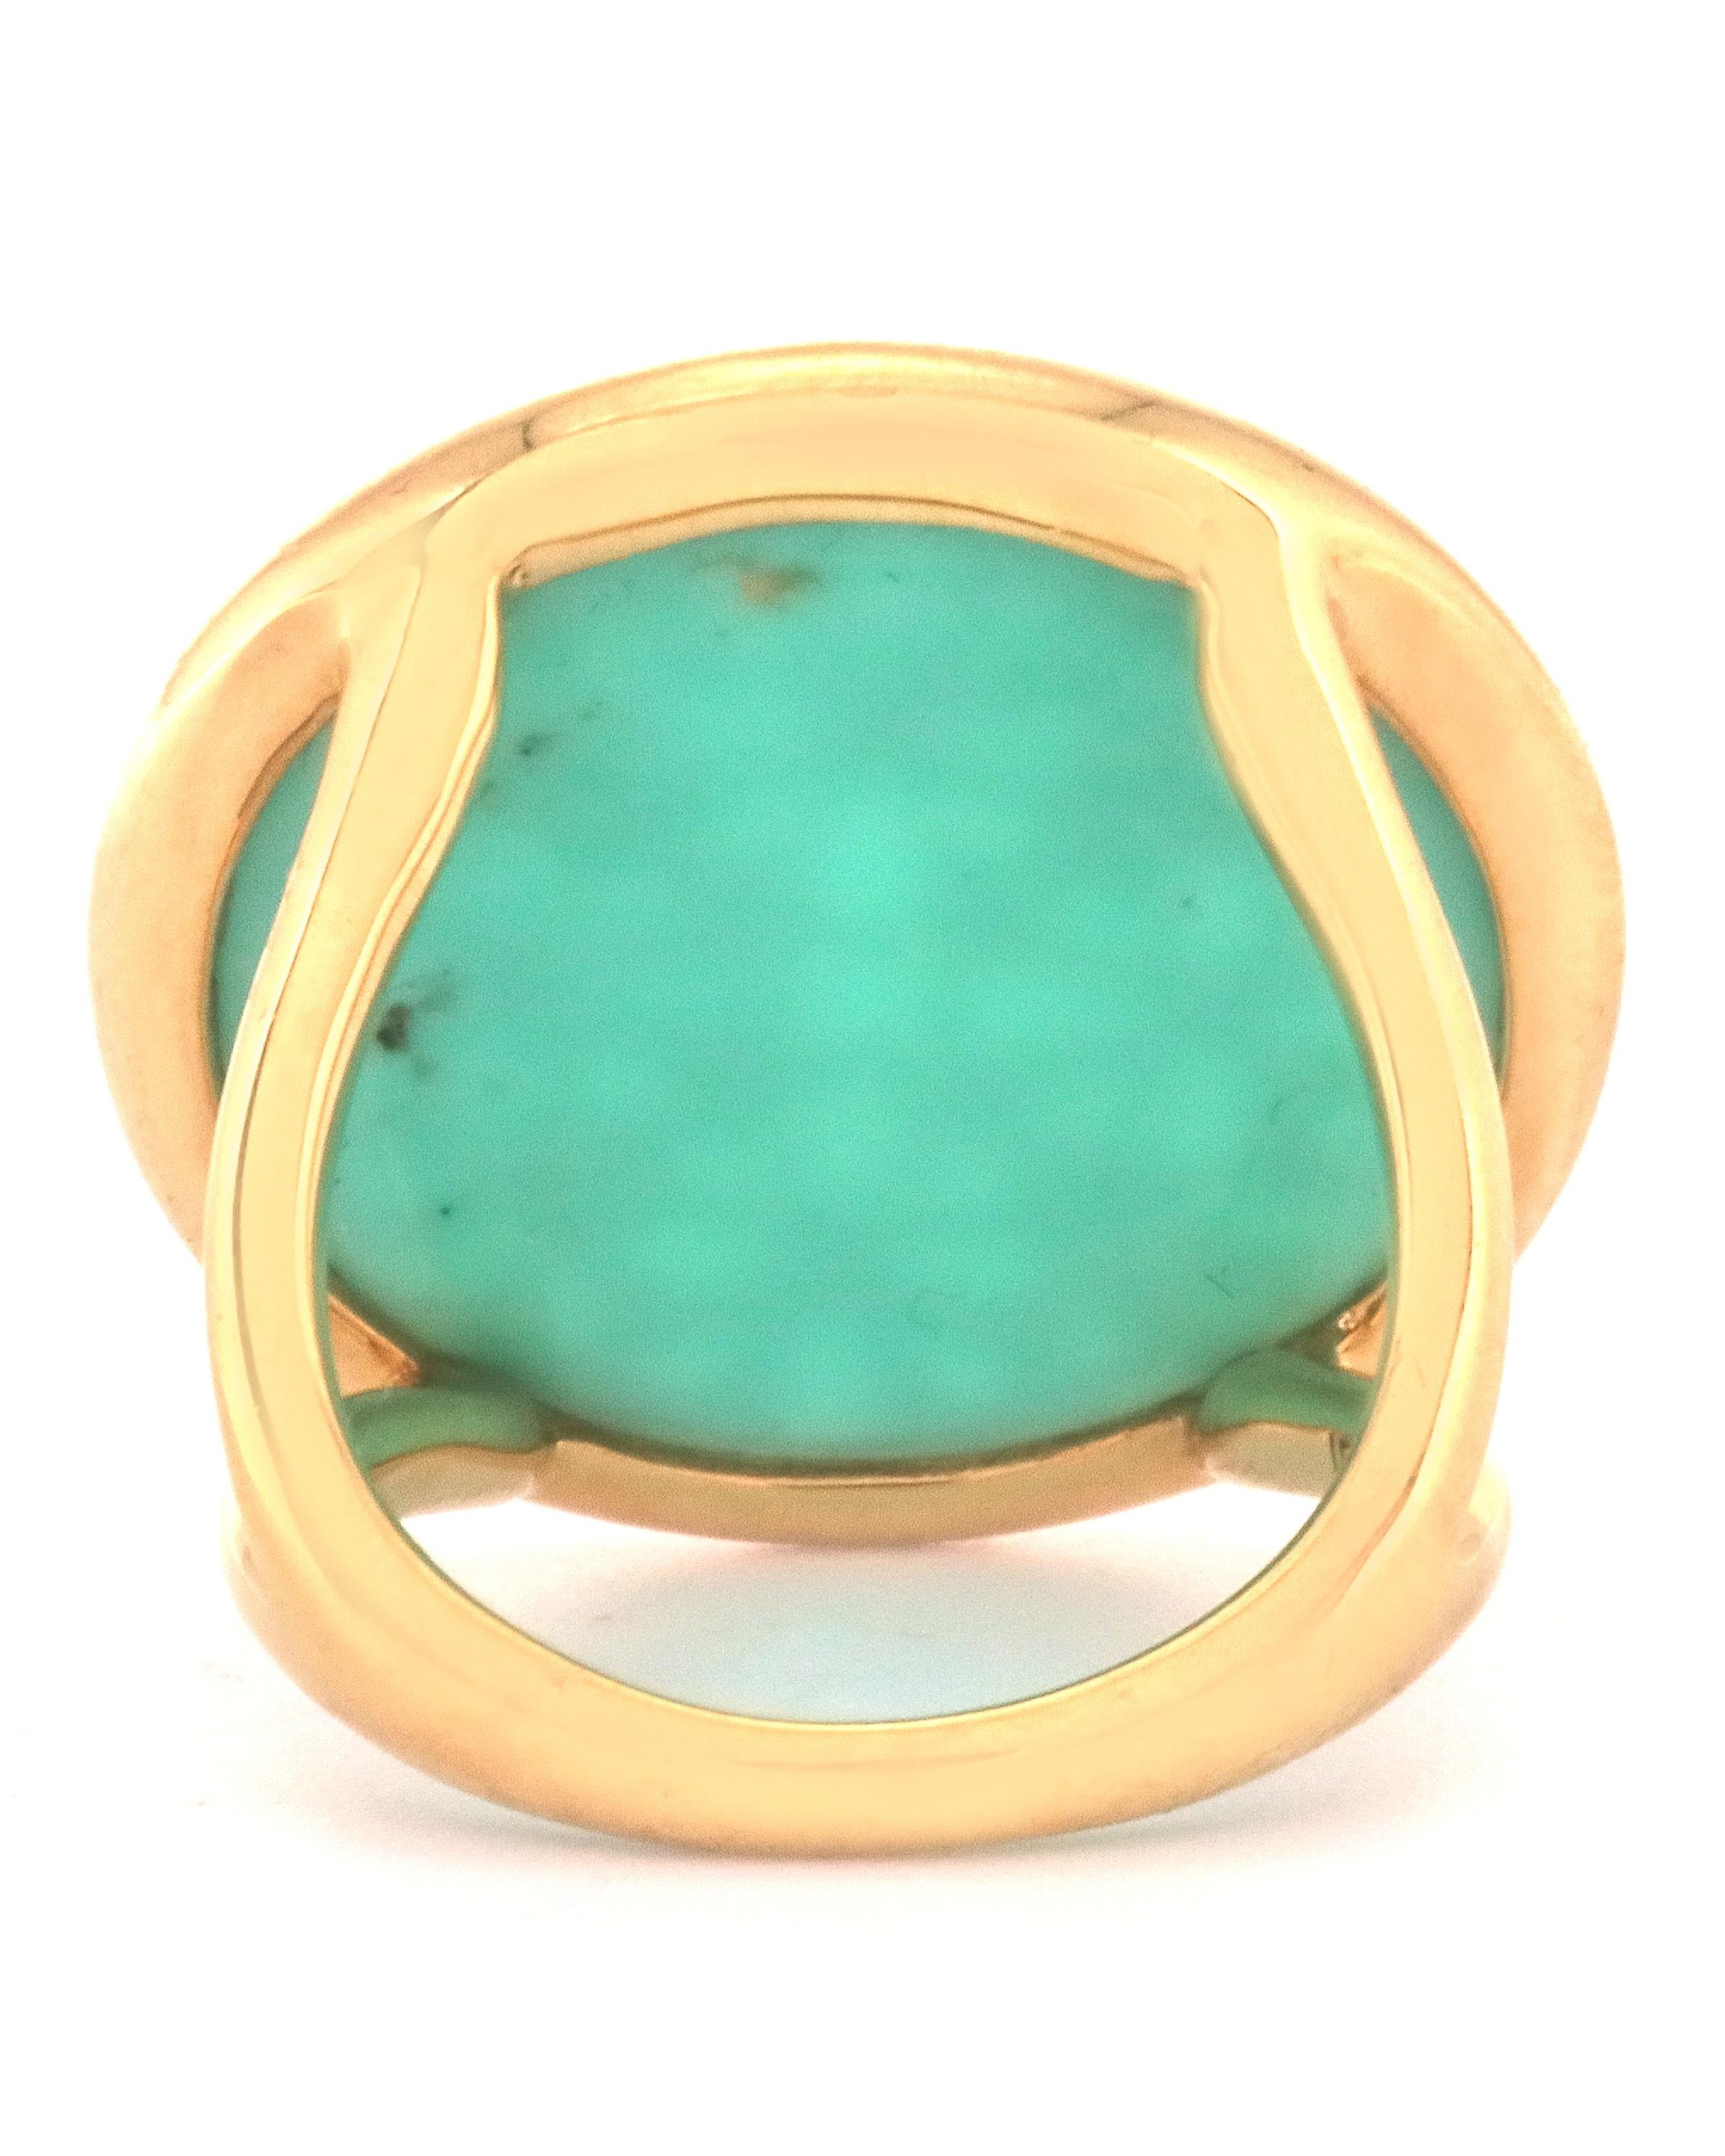 IPPOLITA 18K Gold Polished Rock Candy Round Cutout Doublet Ring in Isola GR428ISOLA Ring Size 7. Shipped in Ippolita Pouch. Manufacturers Suggested Retail Price $2595